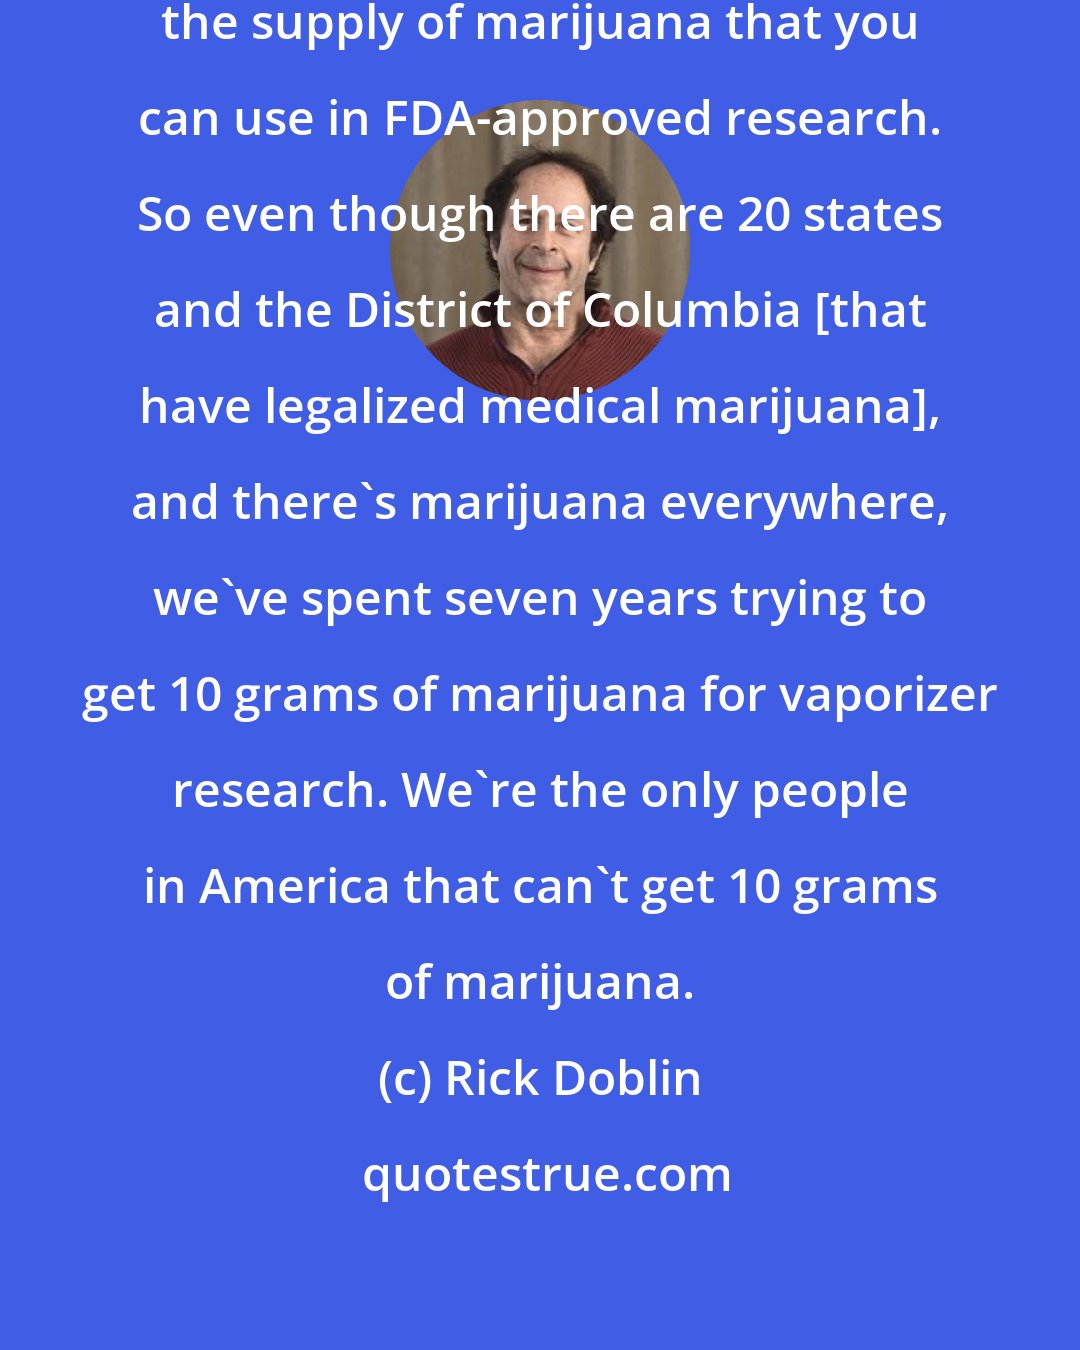 Rick Doblin: The government has a monopoly on the supply of marijuana that you can use in FDA-approved research. So even though there are 20 states and the District of Columbia [that have legalized medical marijuana], and there's marijuana everywhere, we've spent seven years trying to get 10 grams of marijuana for vaporizer research. We're the only people in America that can't get 10 grams of marijuana.